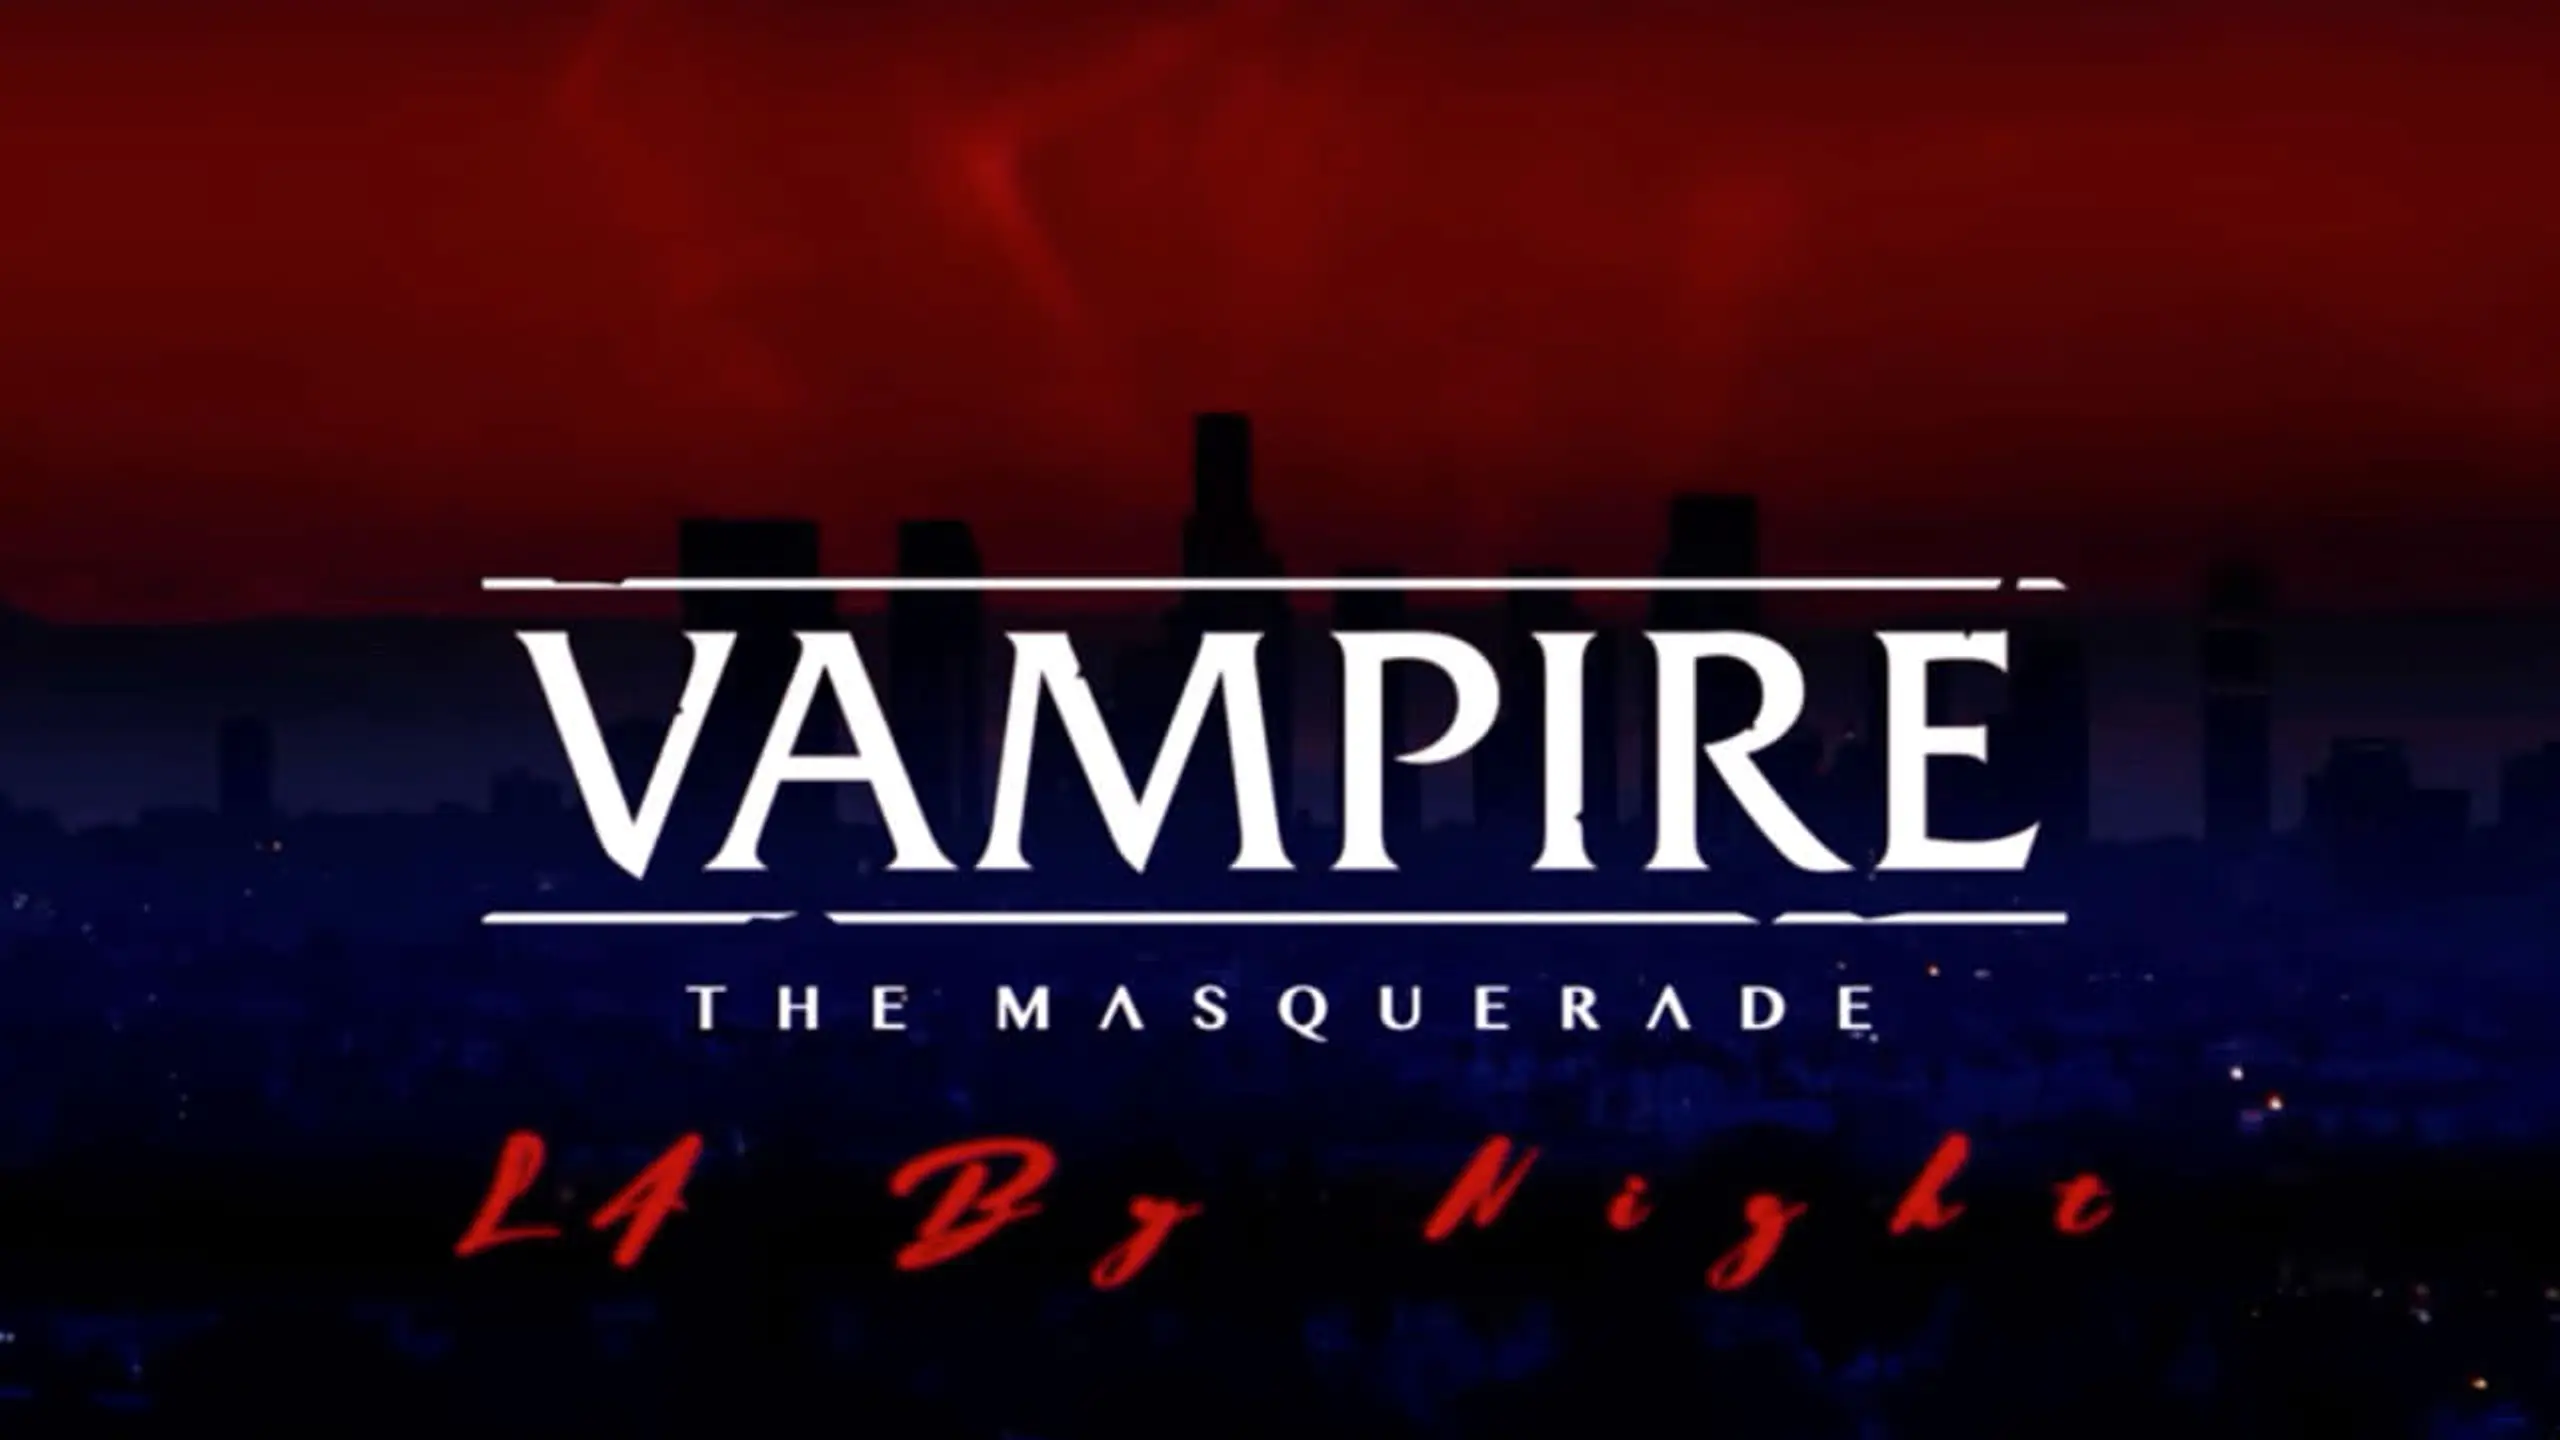 Vampire: The Masquerade - L.A. By Night